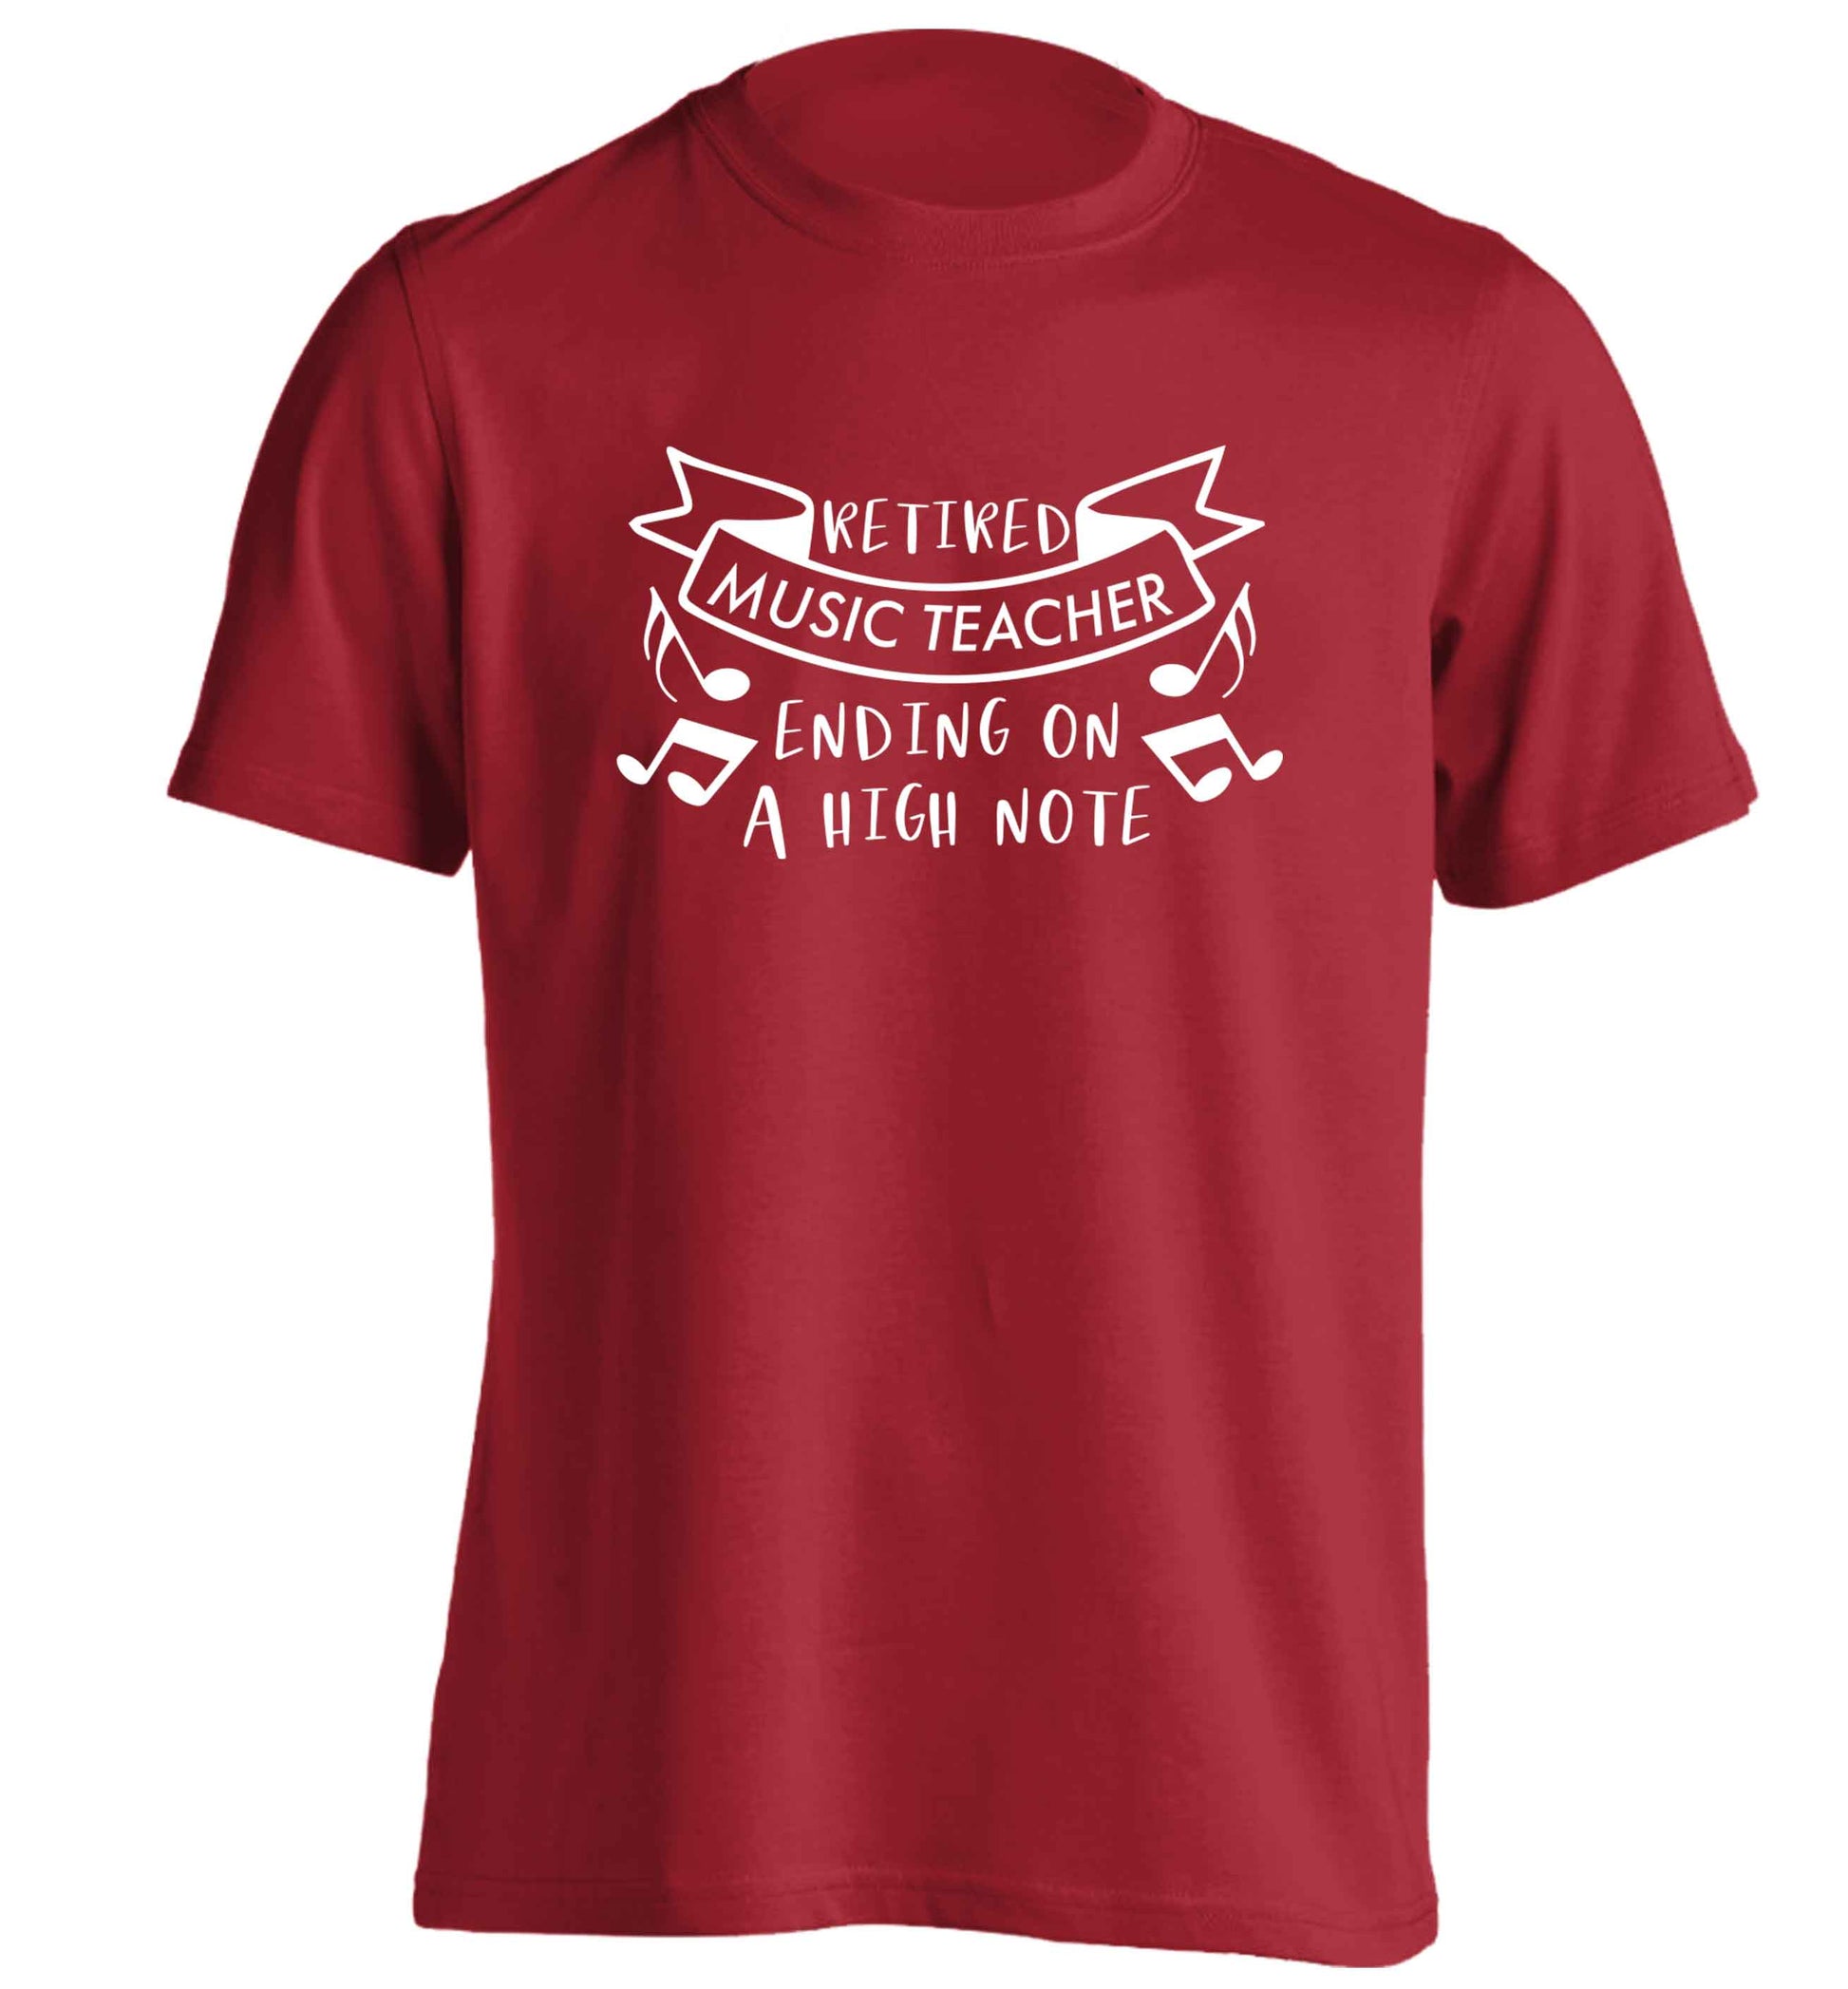 Retired music teacher ending on a high note adults unisex red Tshirt 2XL